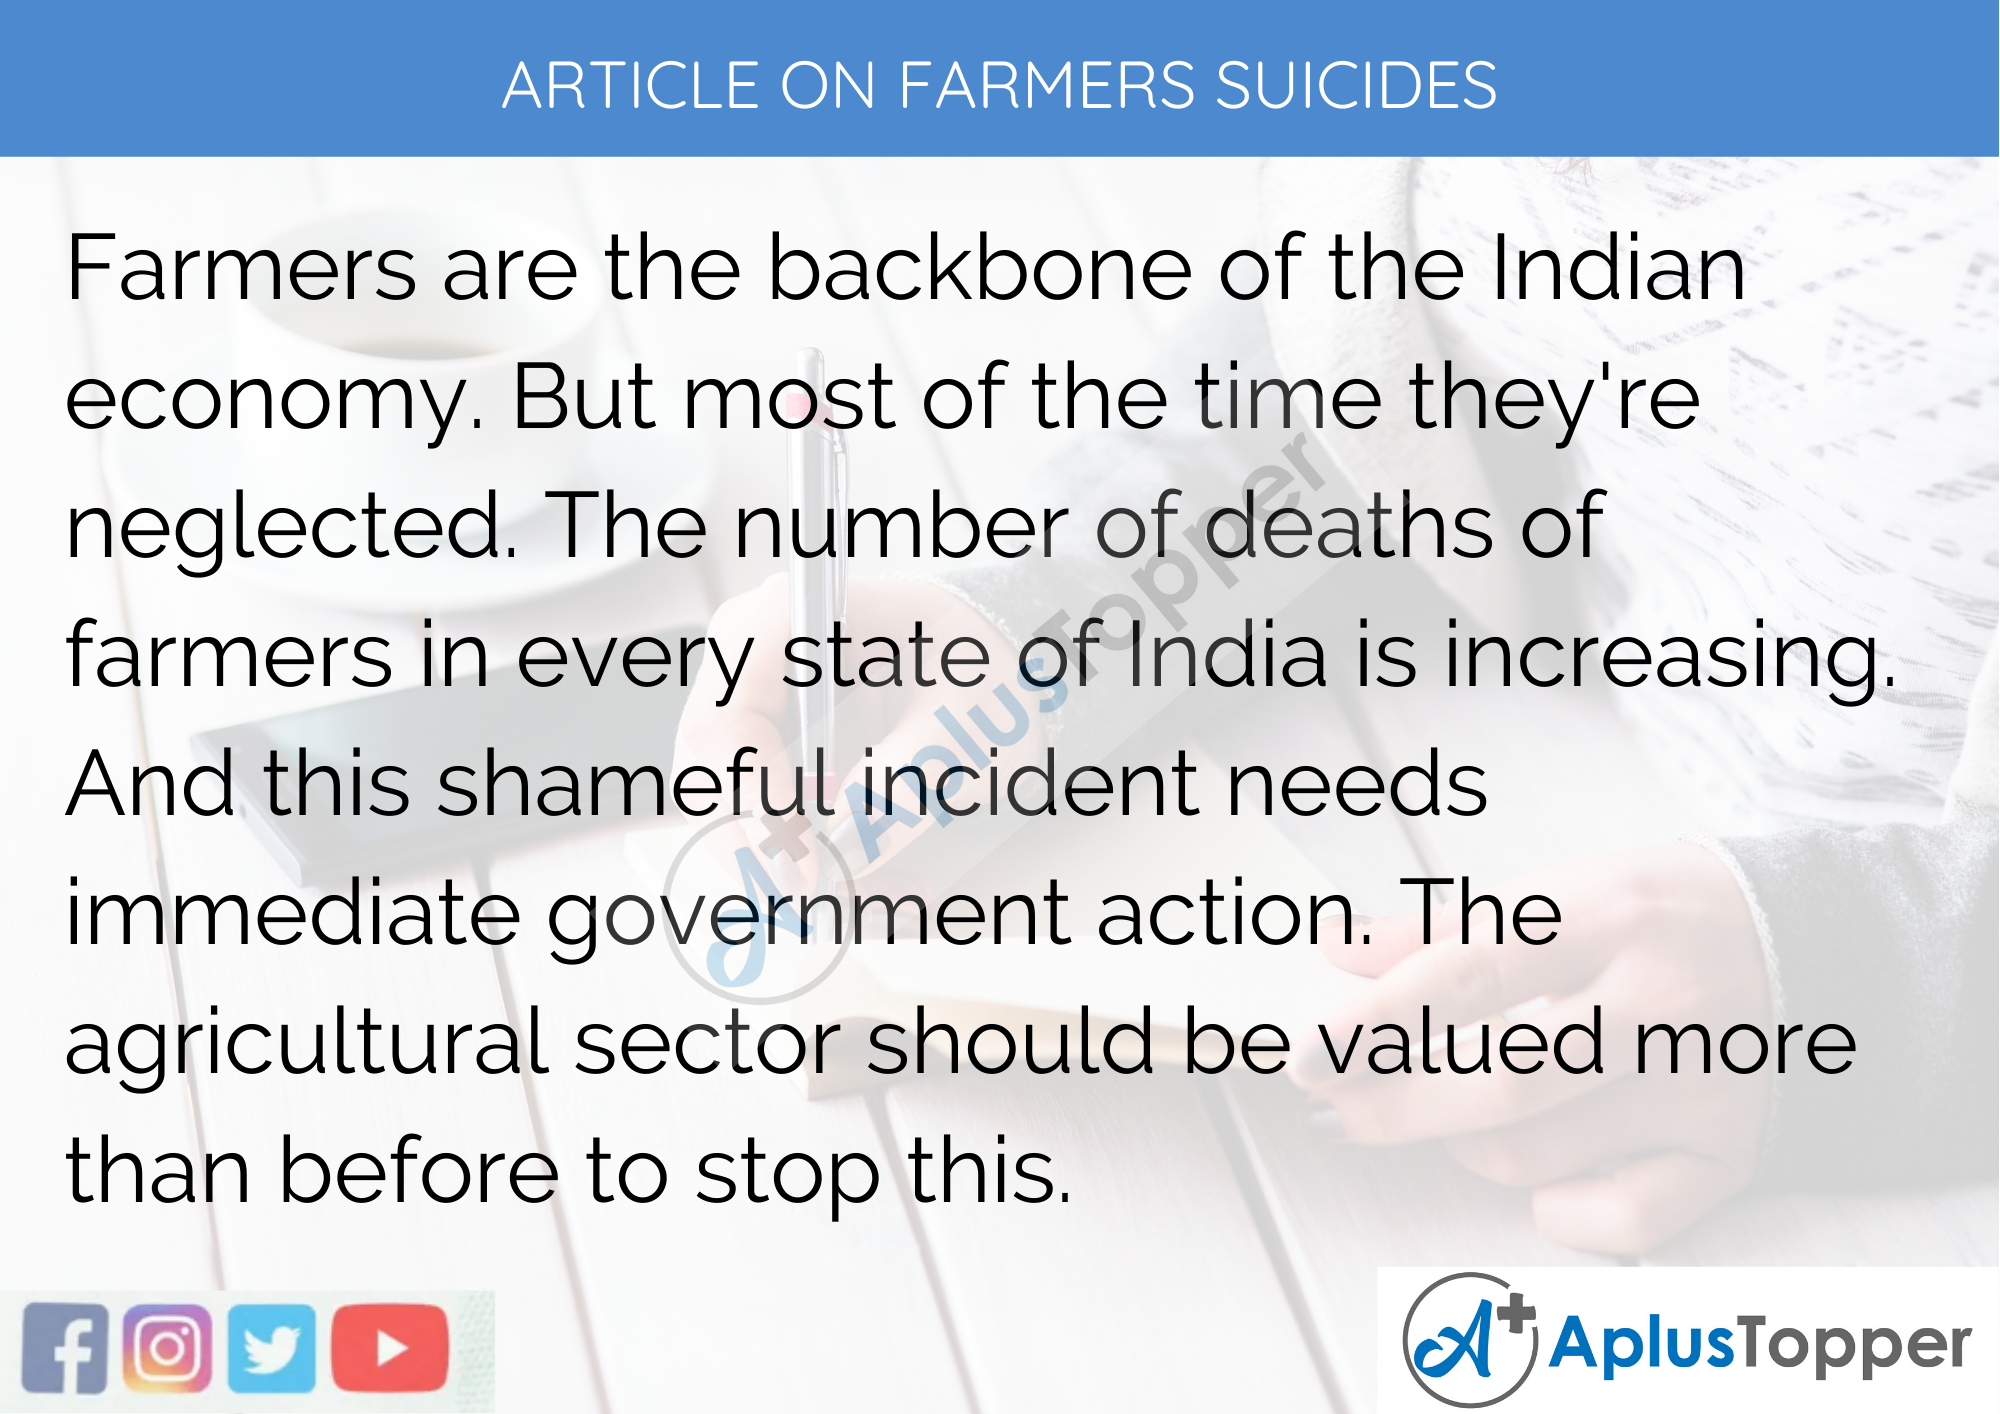 Short Article on Farmers Suicides 200 Words in English